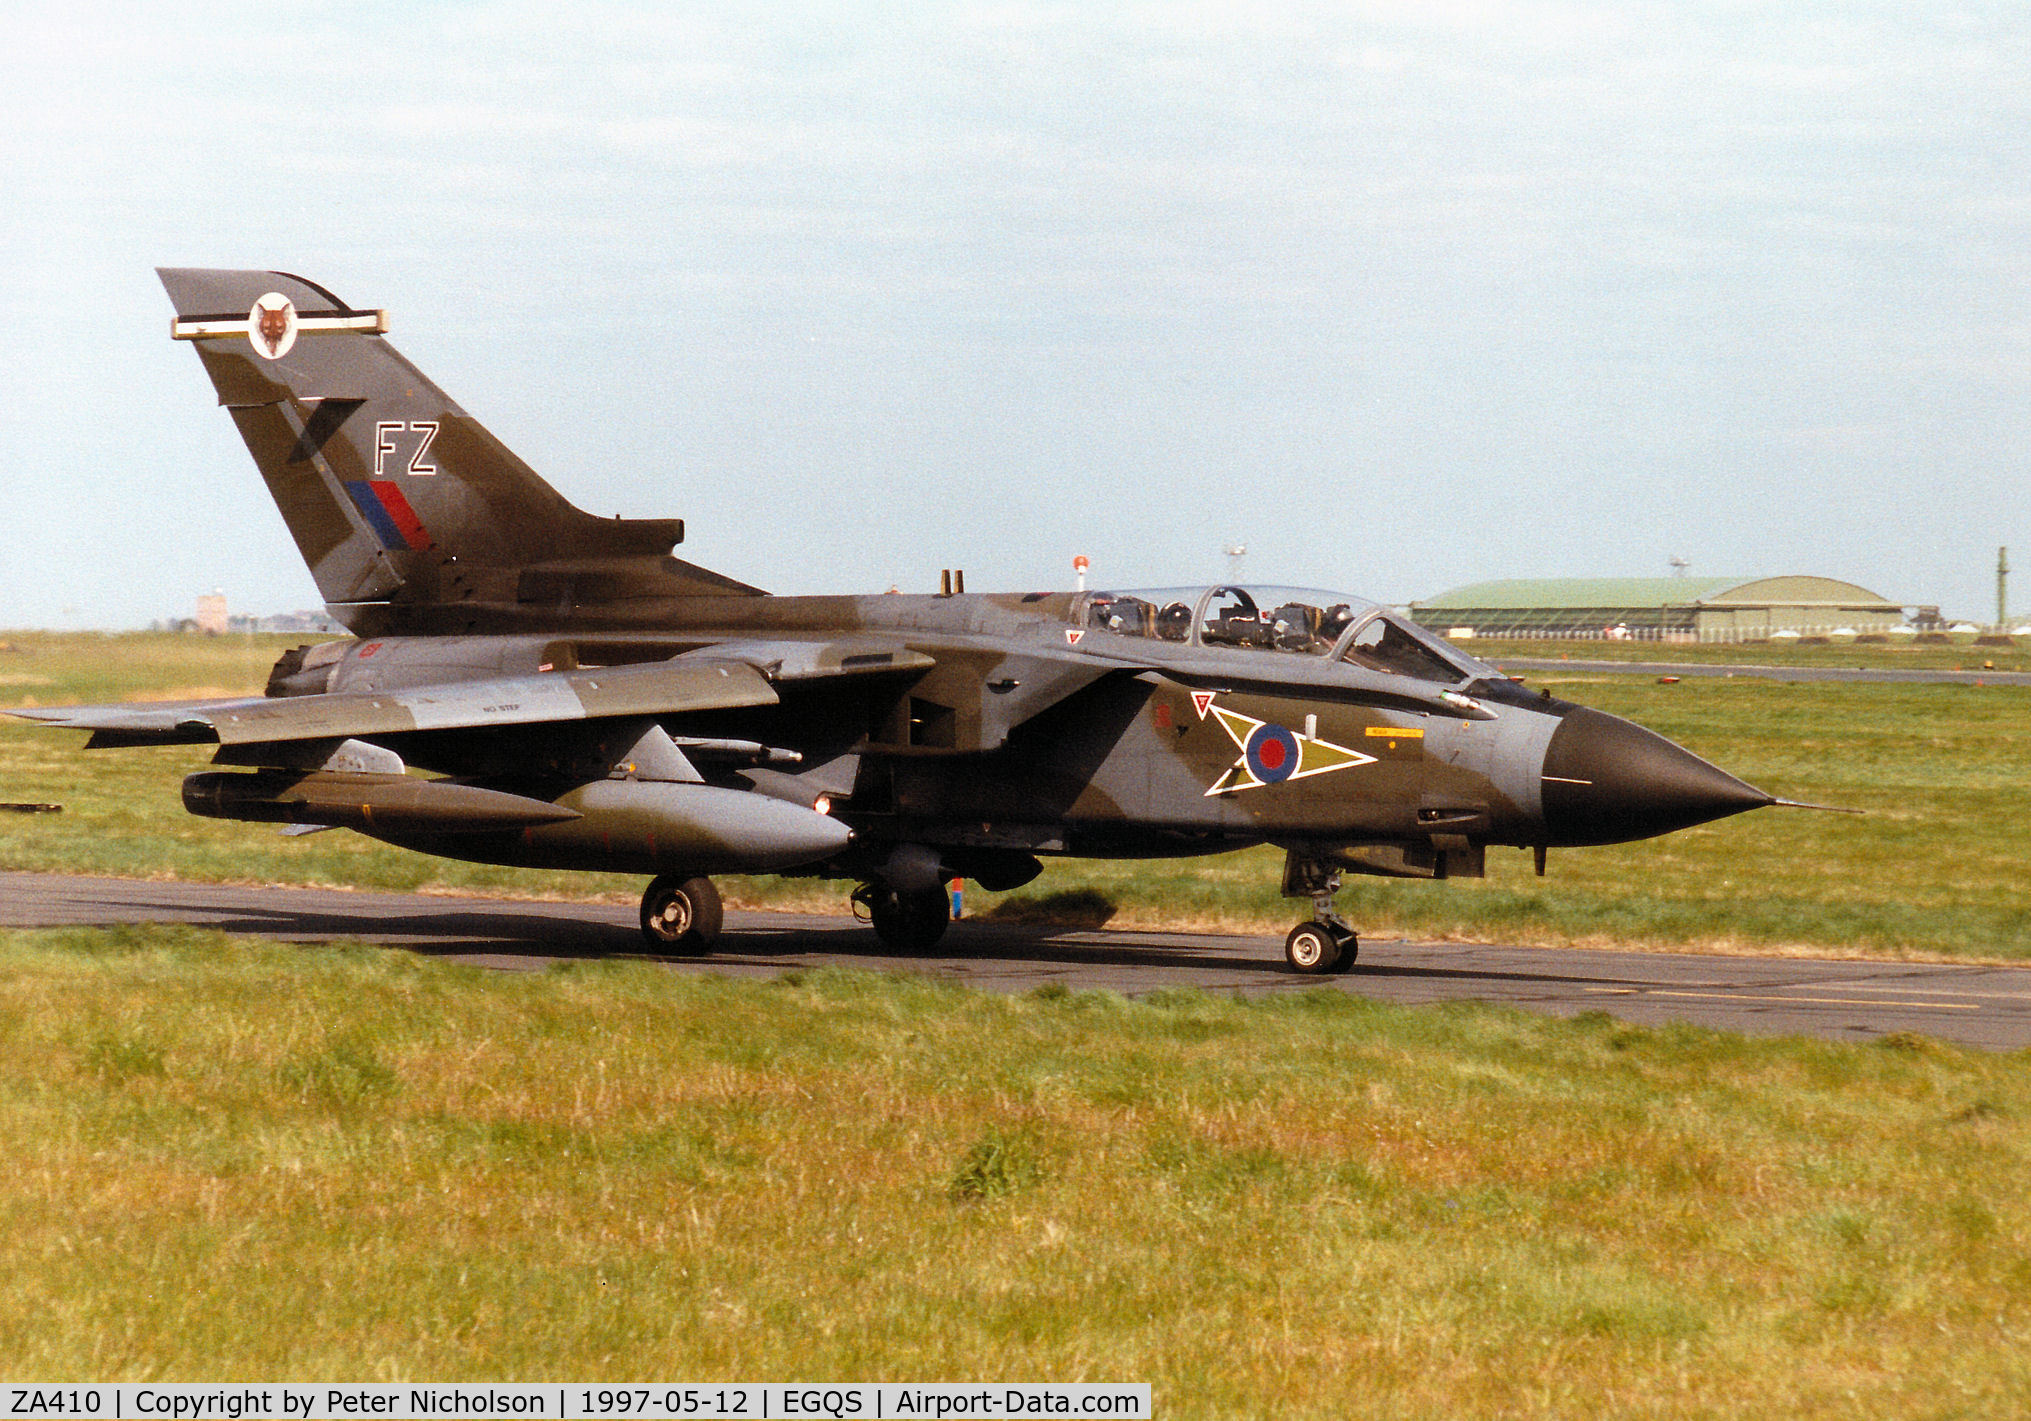 ZA410, 1983 Panavia Tornado GR.1 C/N 227/BT034/3109, Tornado GR.1, callsign Jackal 2, of 12 Squadron taxying to Runway 05 at RAF Lossiemouth in the Summer of 1997.